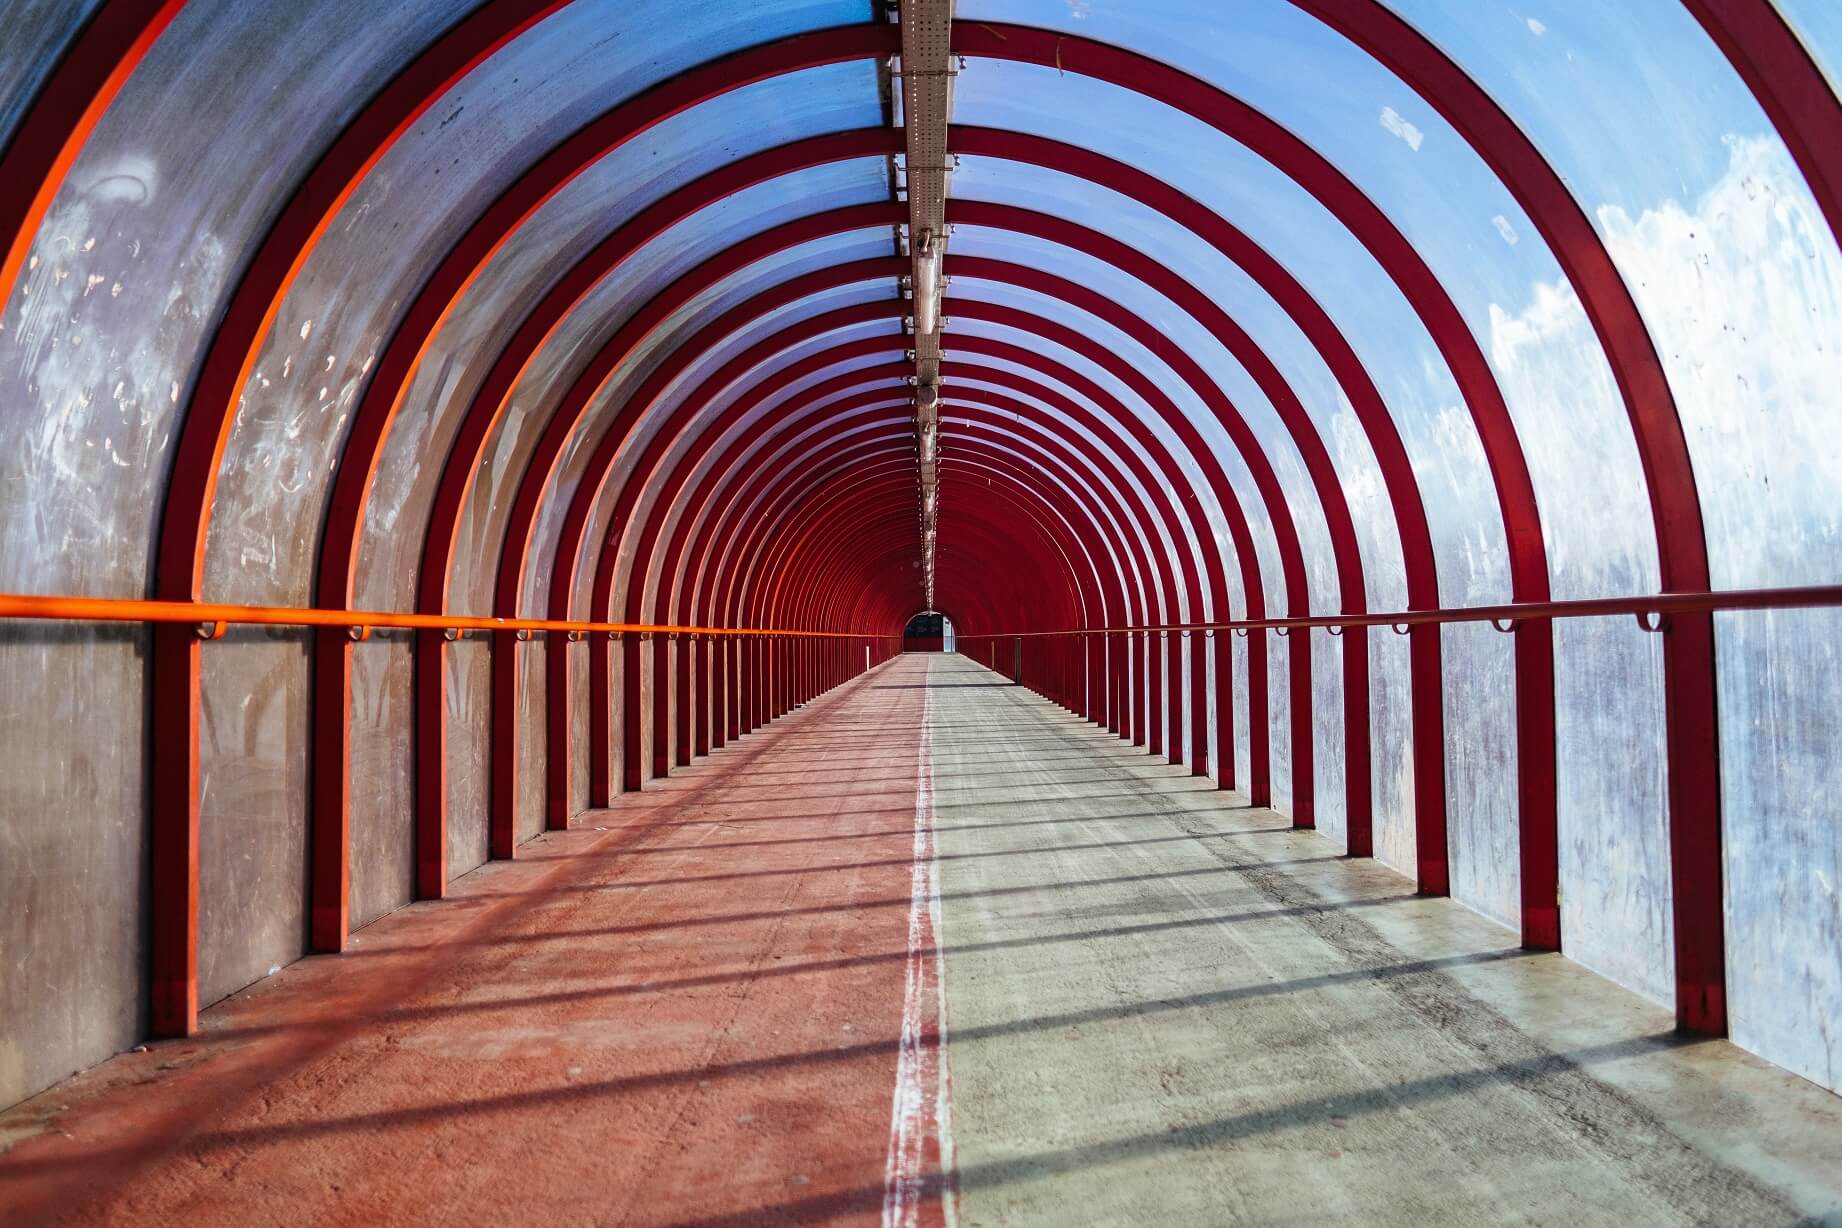 Choosing the Right Path When in Transition street overpass with red beams